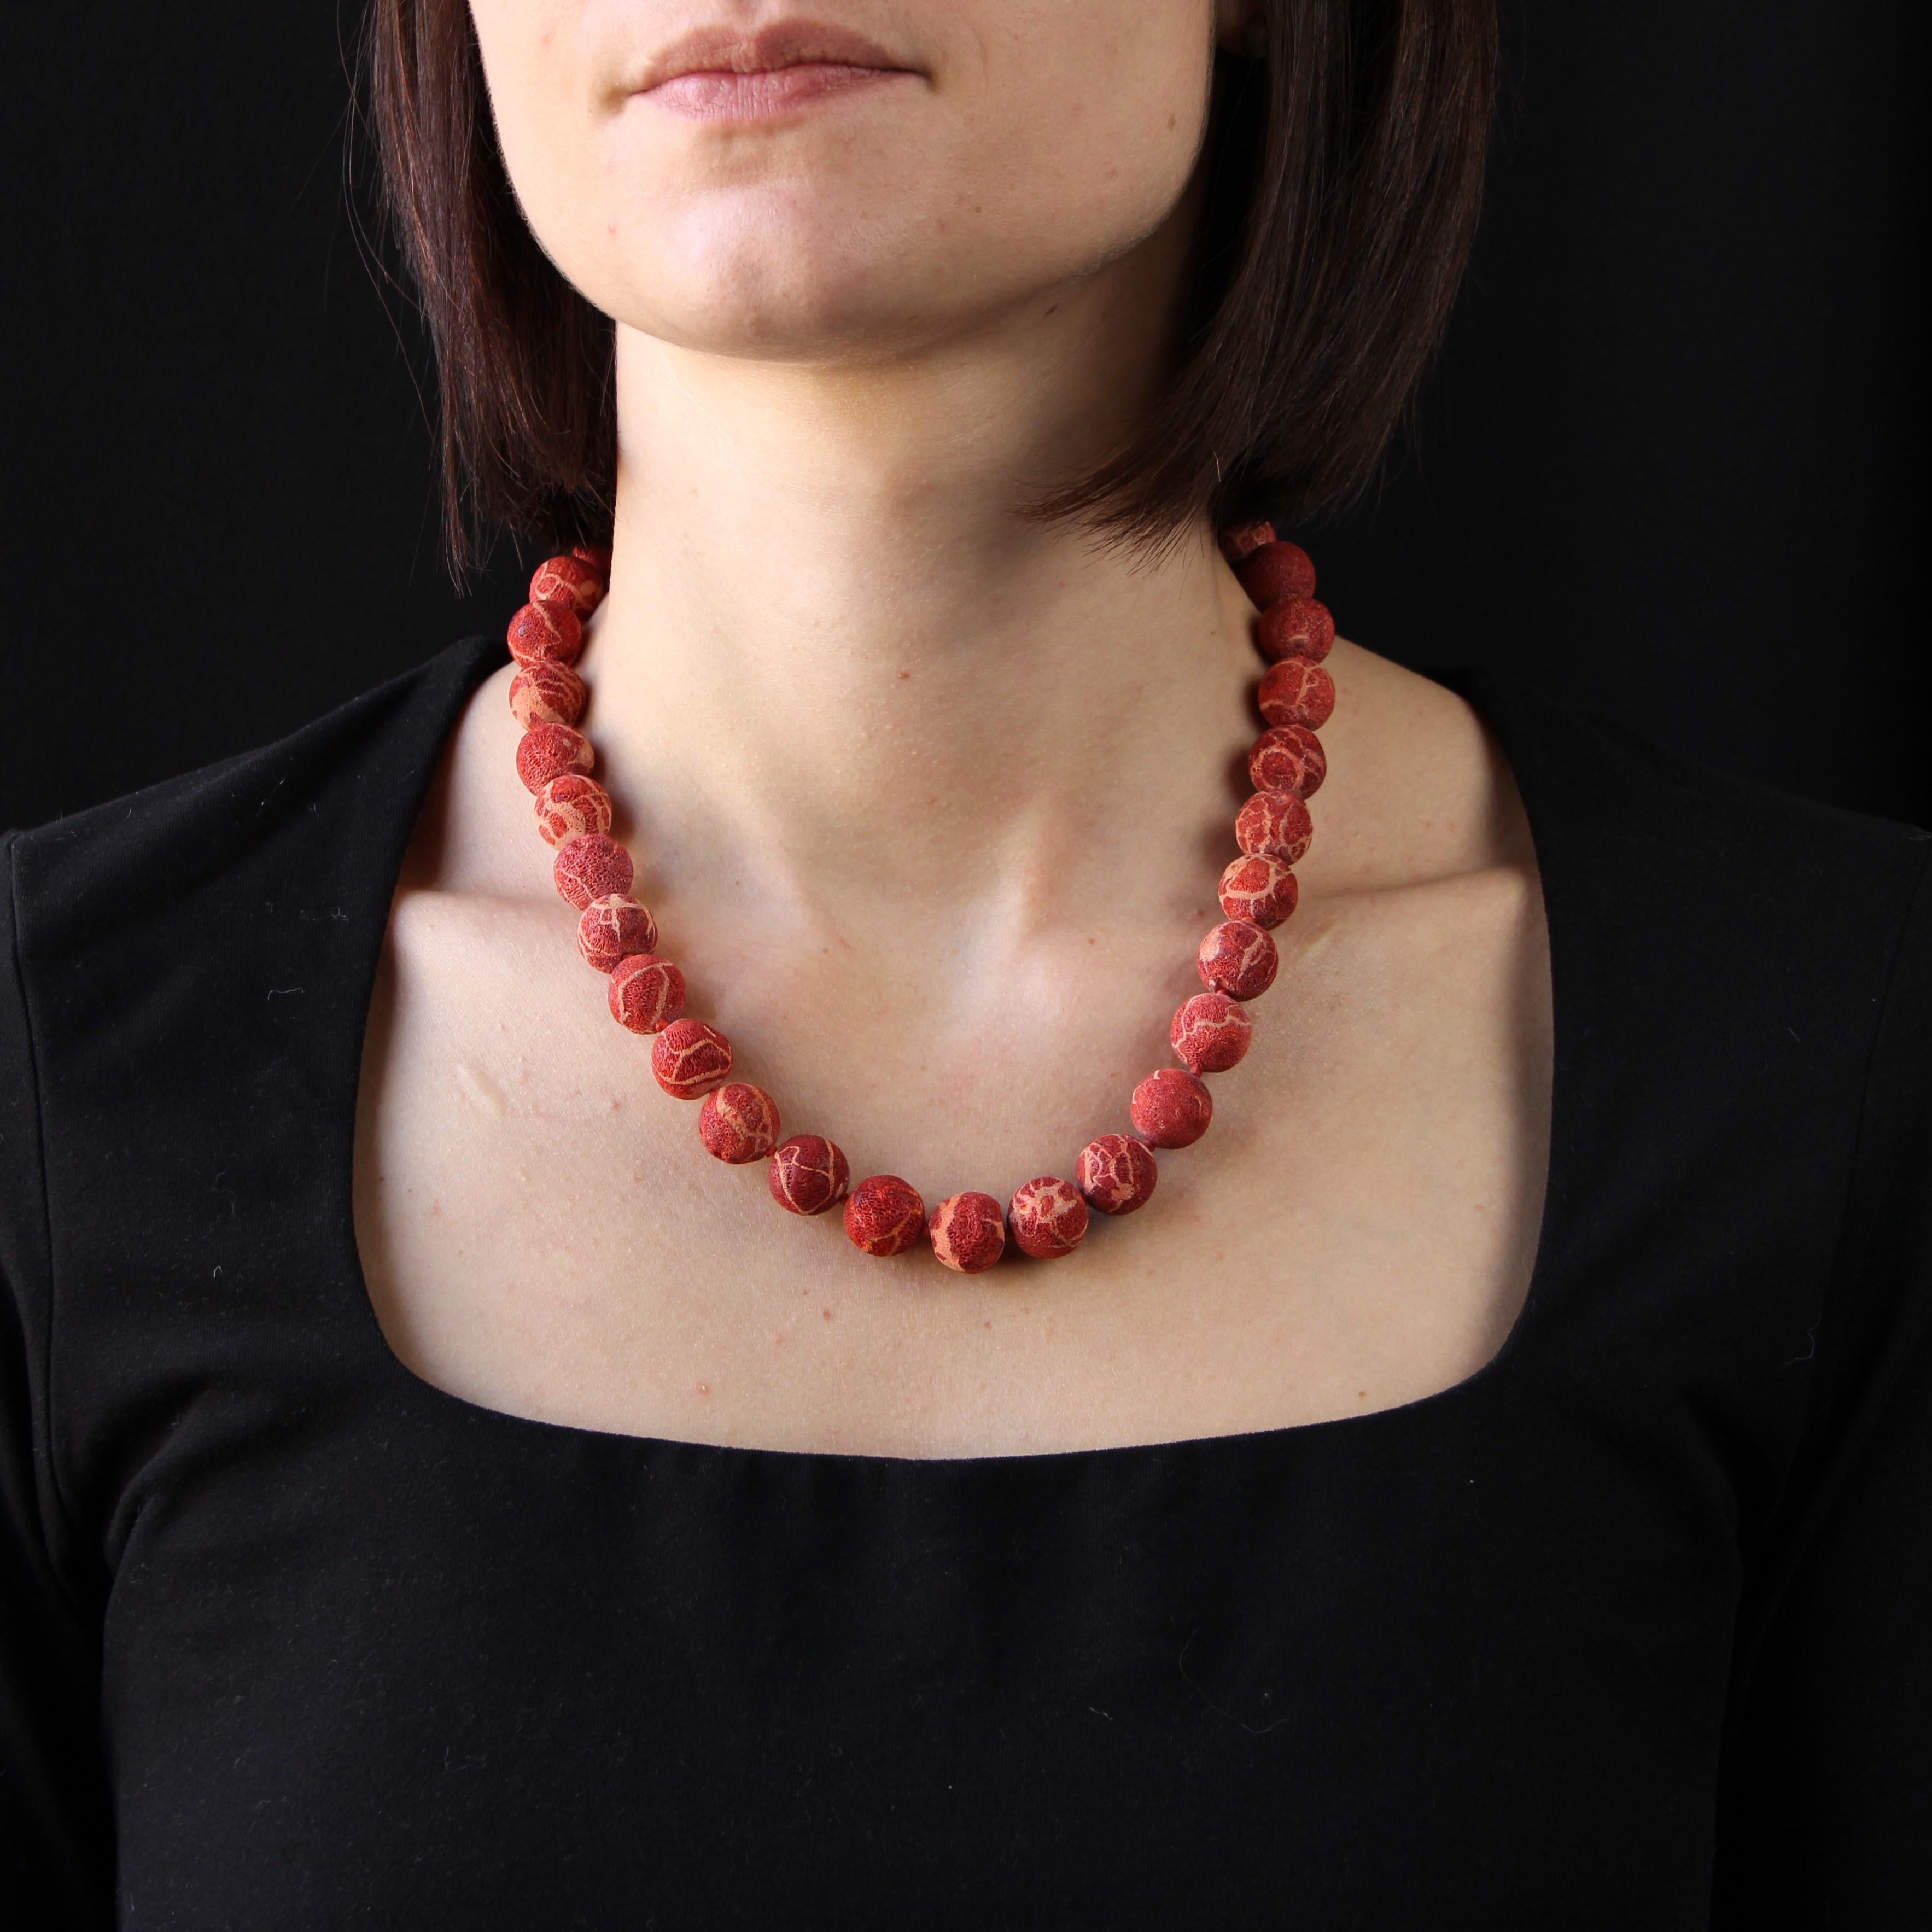 Baume Creation - Unique piece.
Necklace of unpolished natural coral beads, clasp in 18 karat yellow gold, ratcheted and chased all around.
Length : 50 cm, diameter of the pearls : 13,5/14 mm approximately.
Total weight of the jewel : 63,3 g